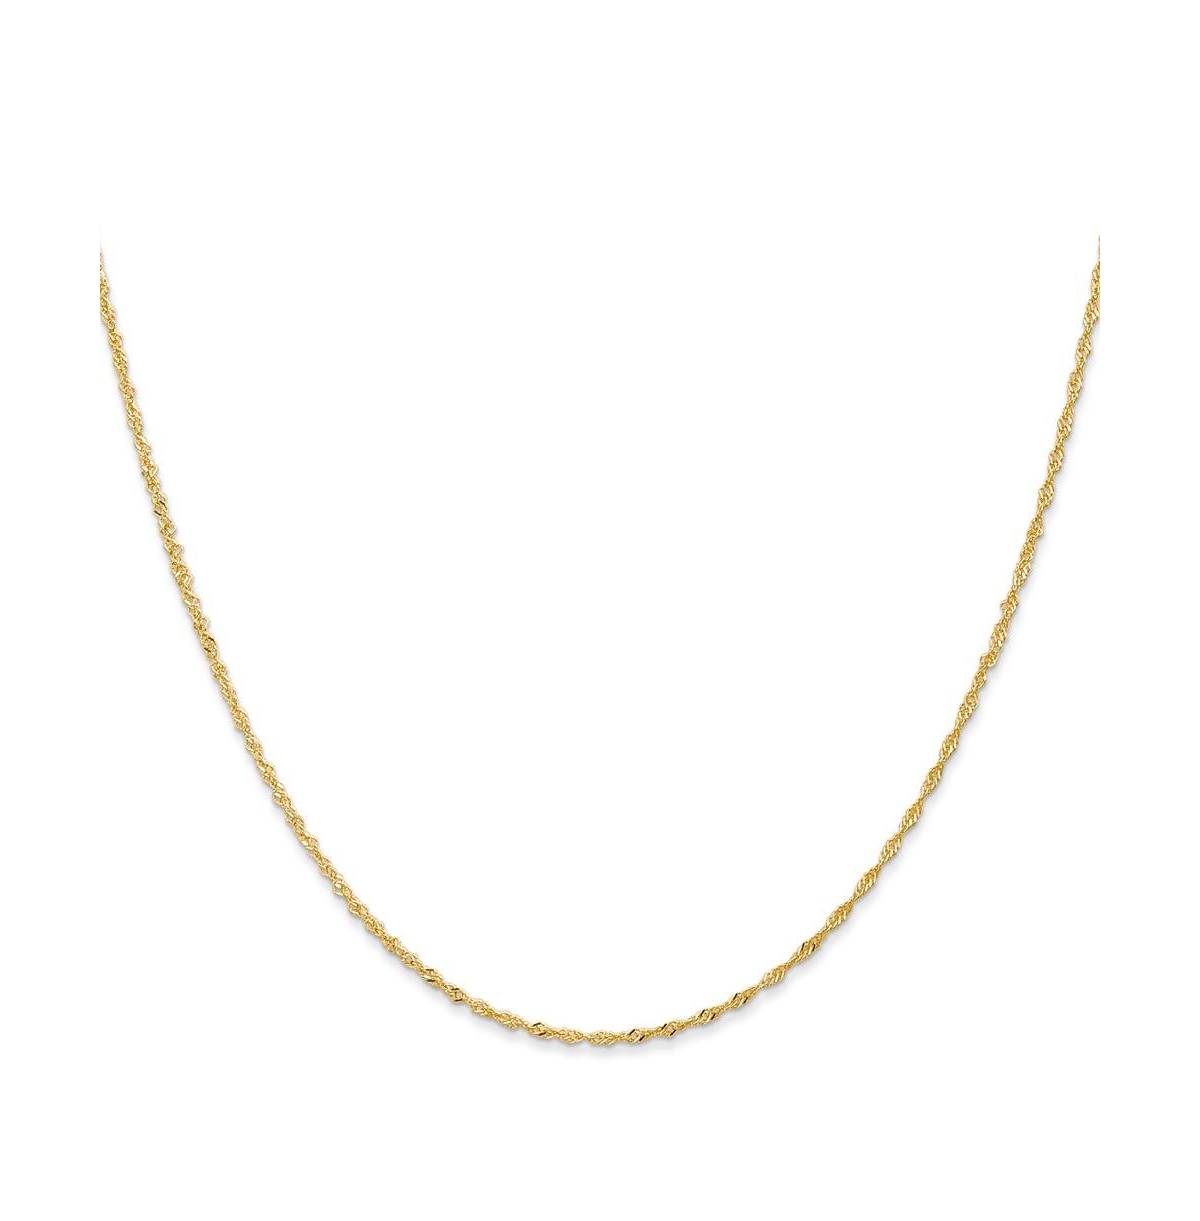 18k Yellow Gold 16" Singapore Chain Necklace - Gold